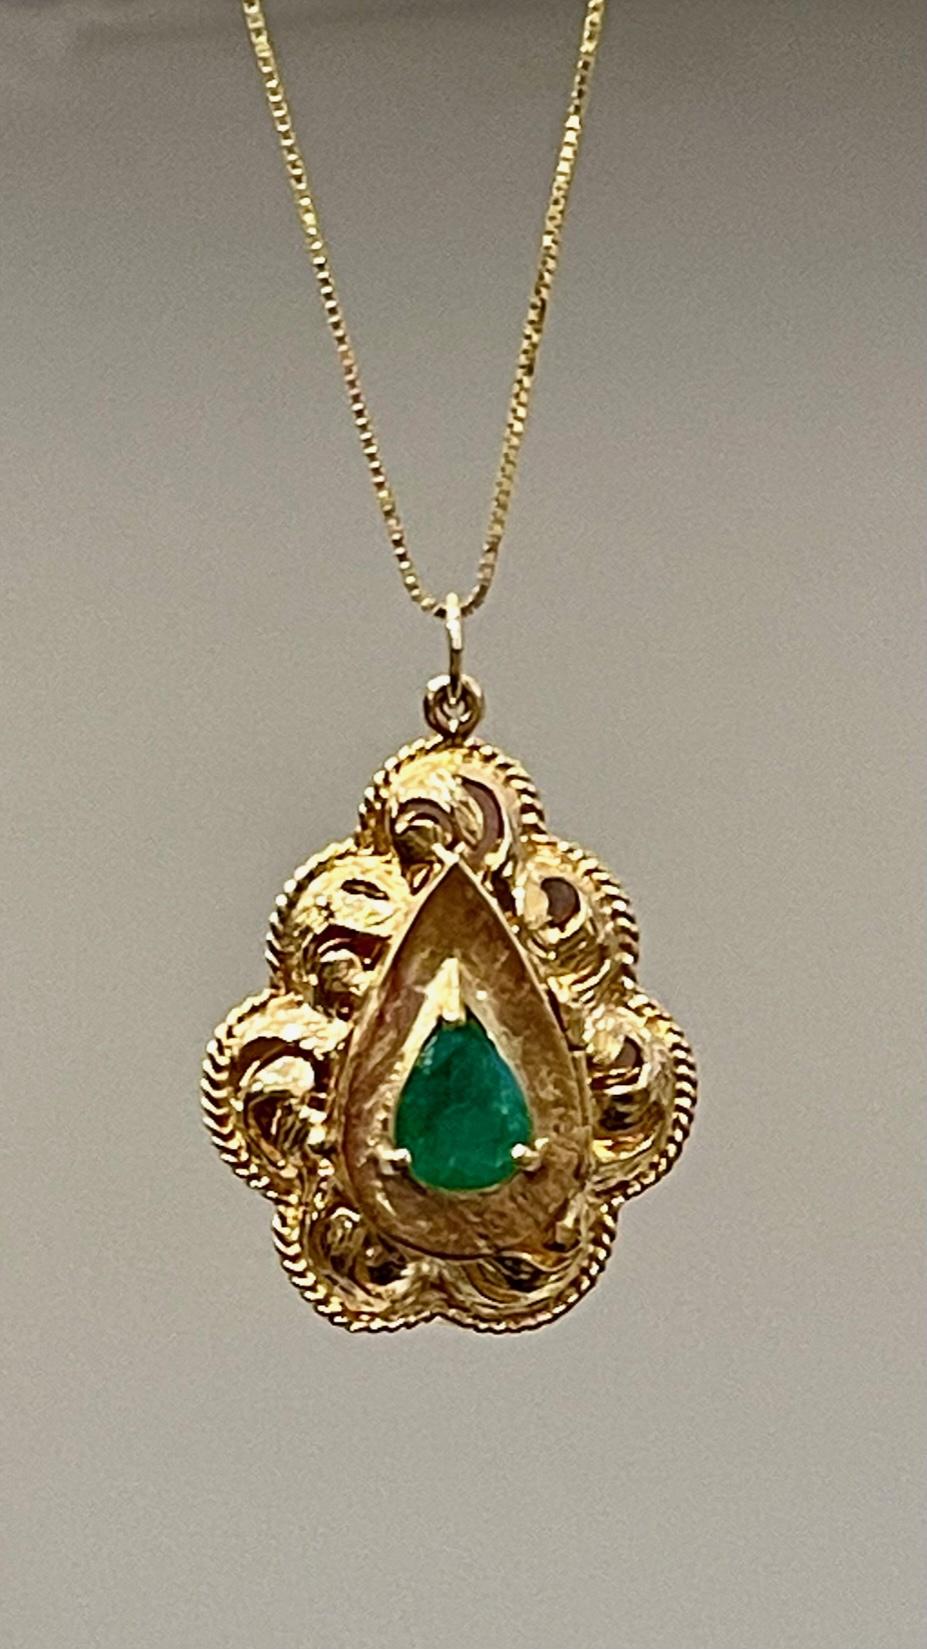 Vintage 14 Karat Yellow Gold 10.5 Gm Chain with Locket and Natural Emerald For Sale 4